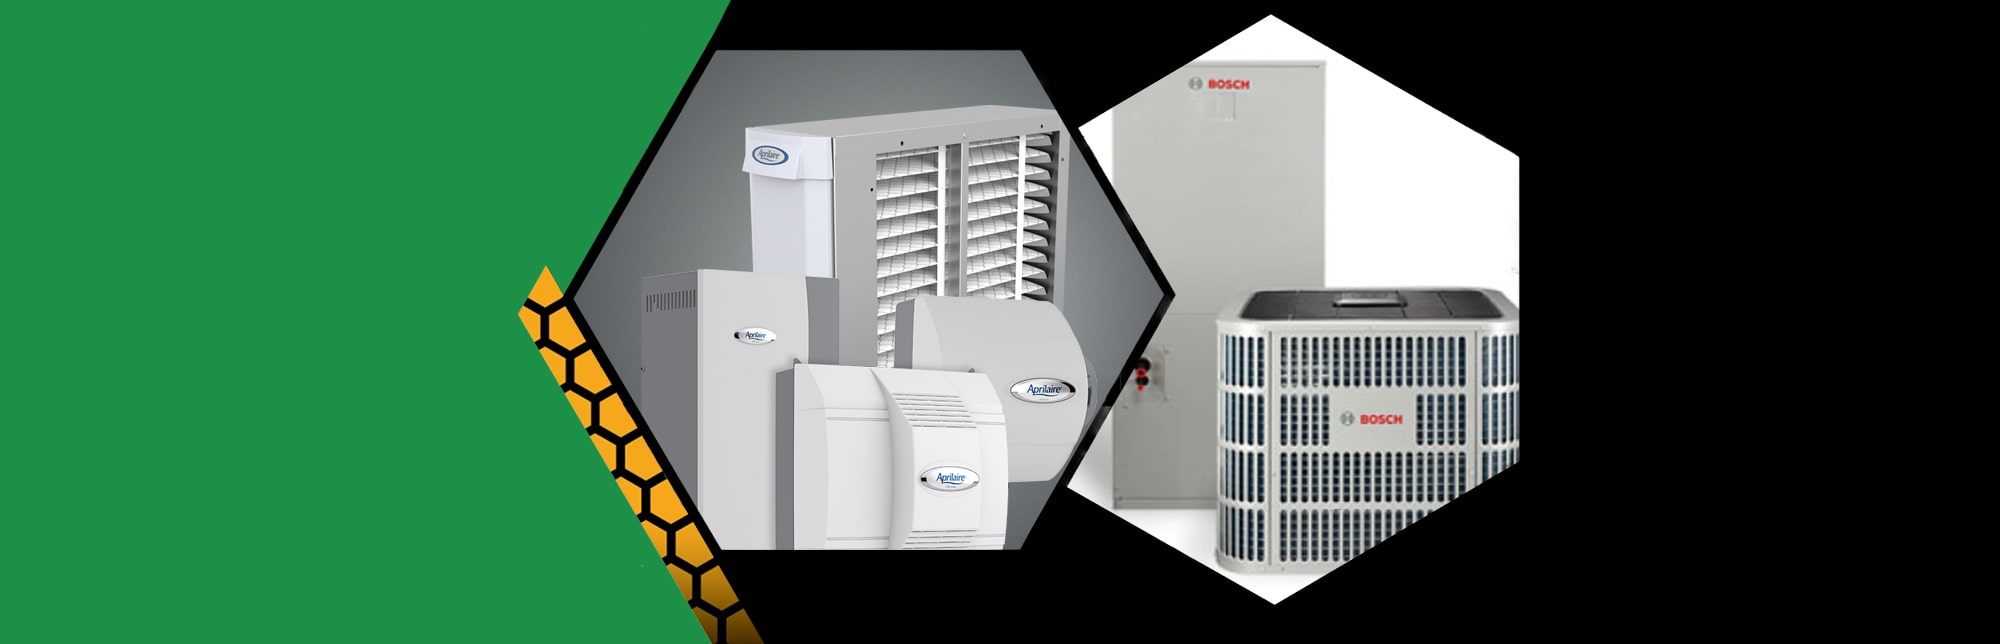 Live in Whiteland IN? Get your Aprilaire or Bosch Furnace units serviced  by Beeson Mechanical Service, Inc.